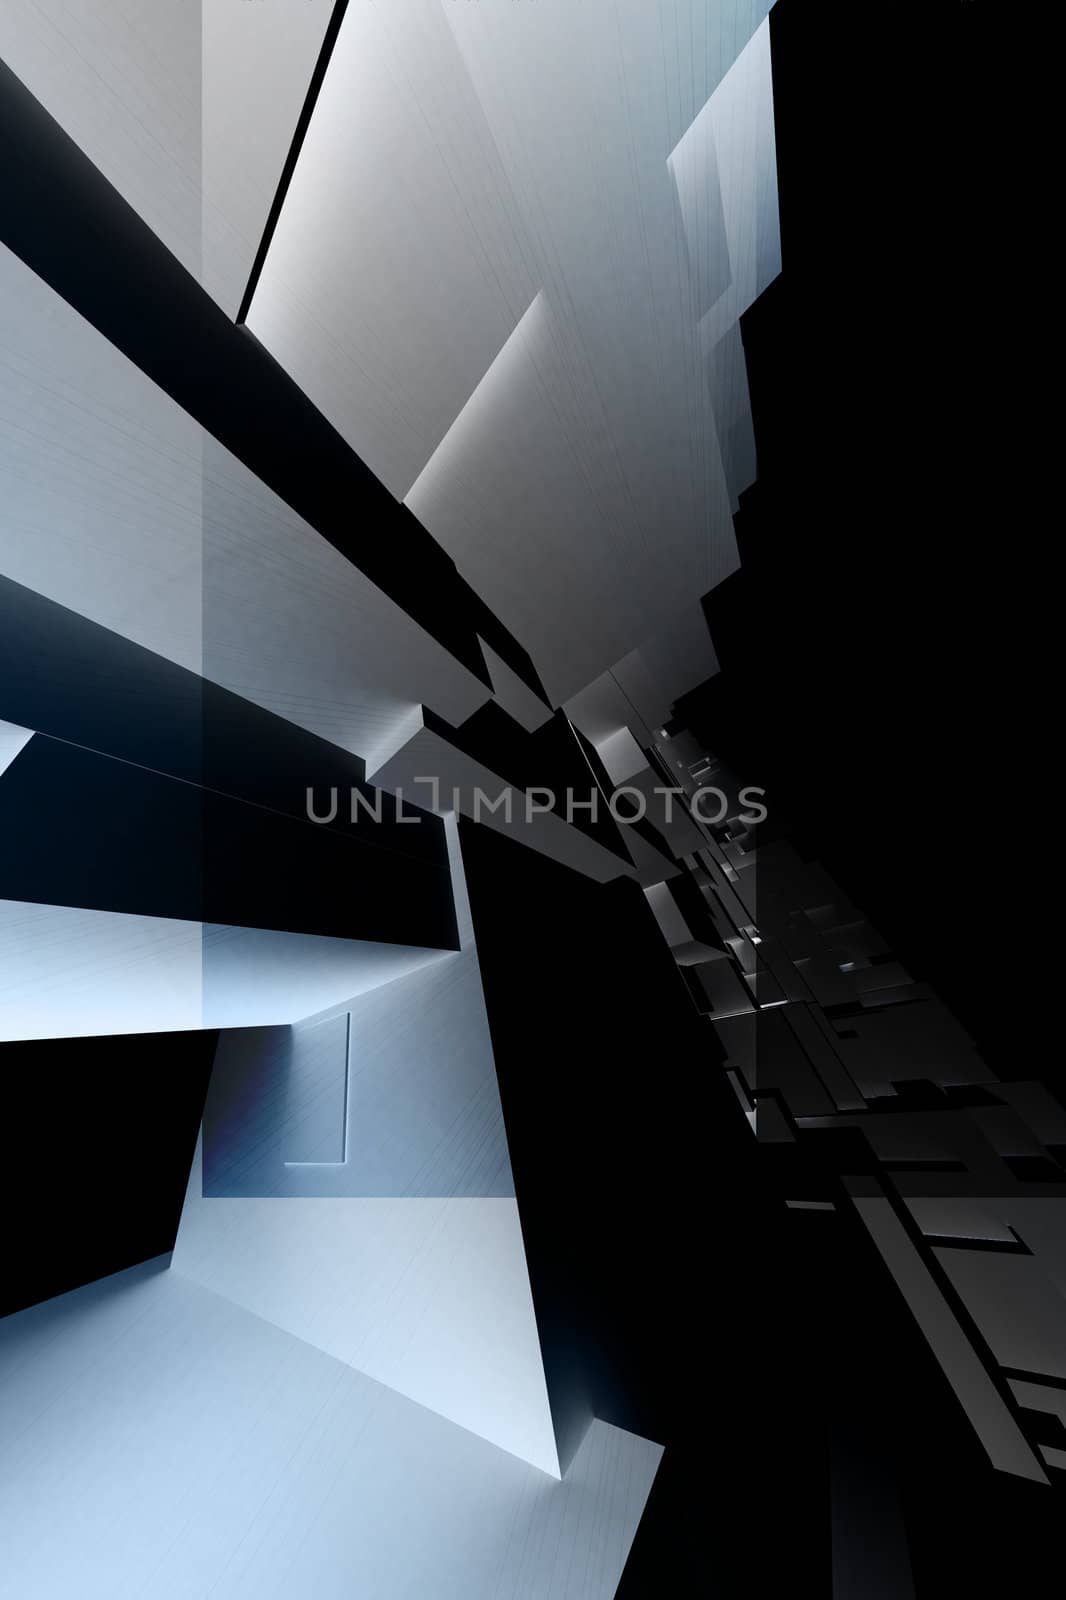 An abstract and architectural background